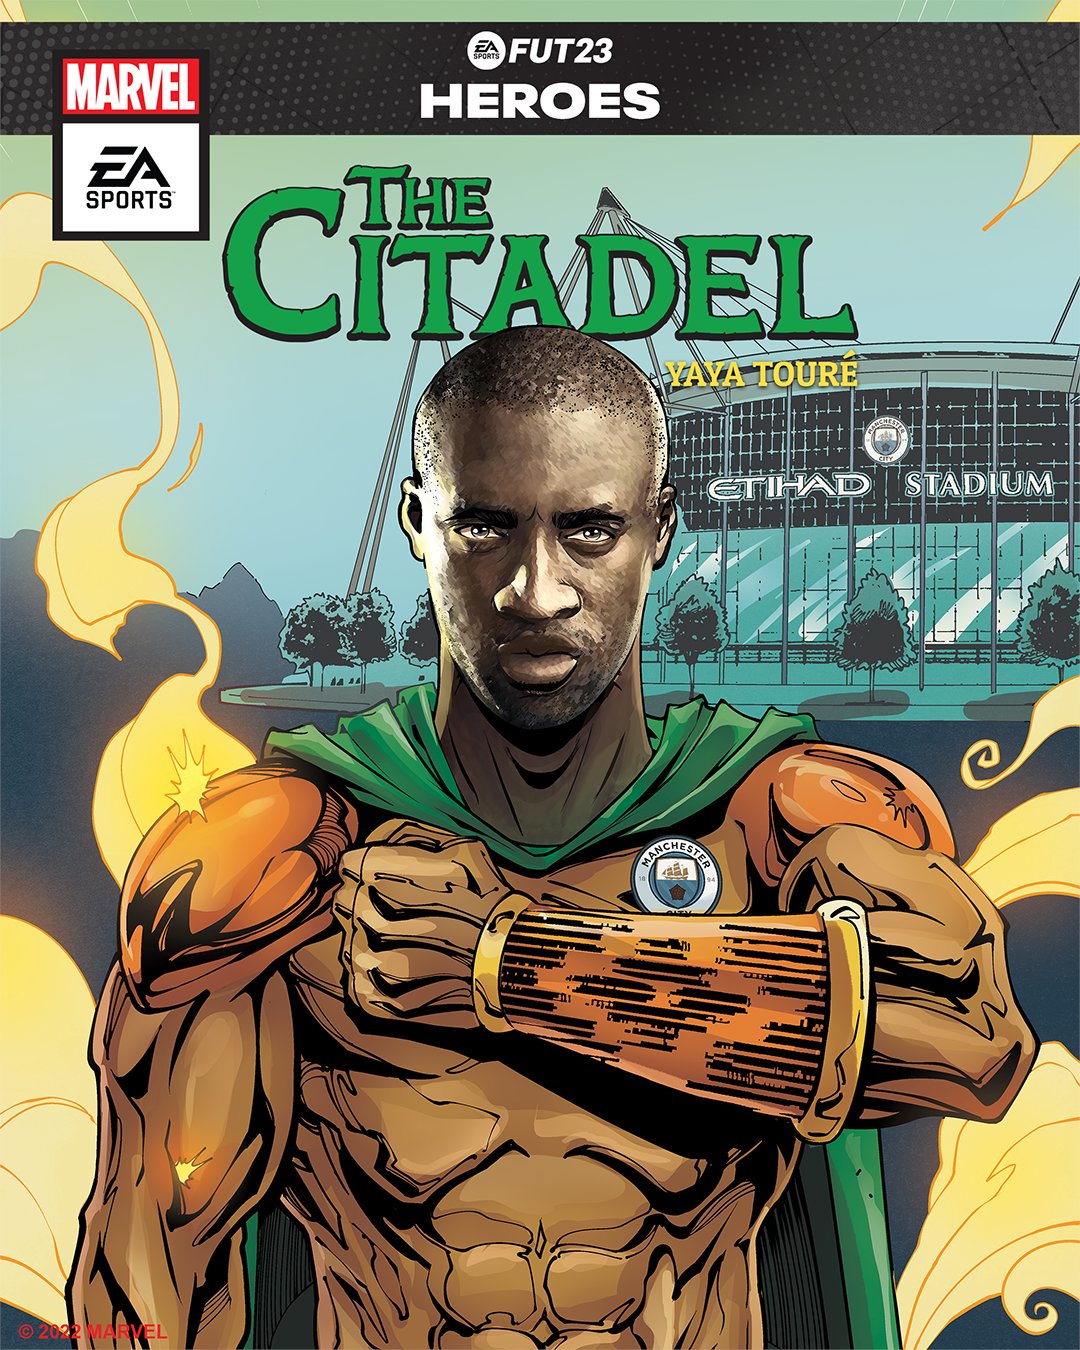 FIFA players reimagined as Marvel heroes.